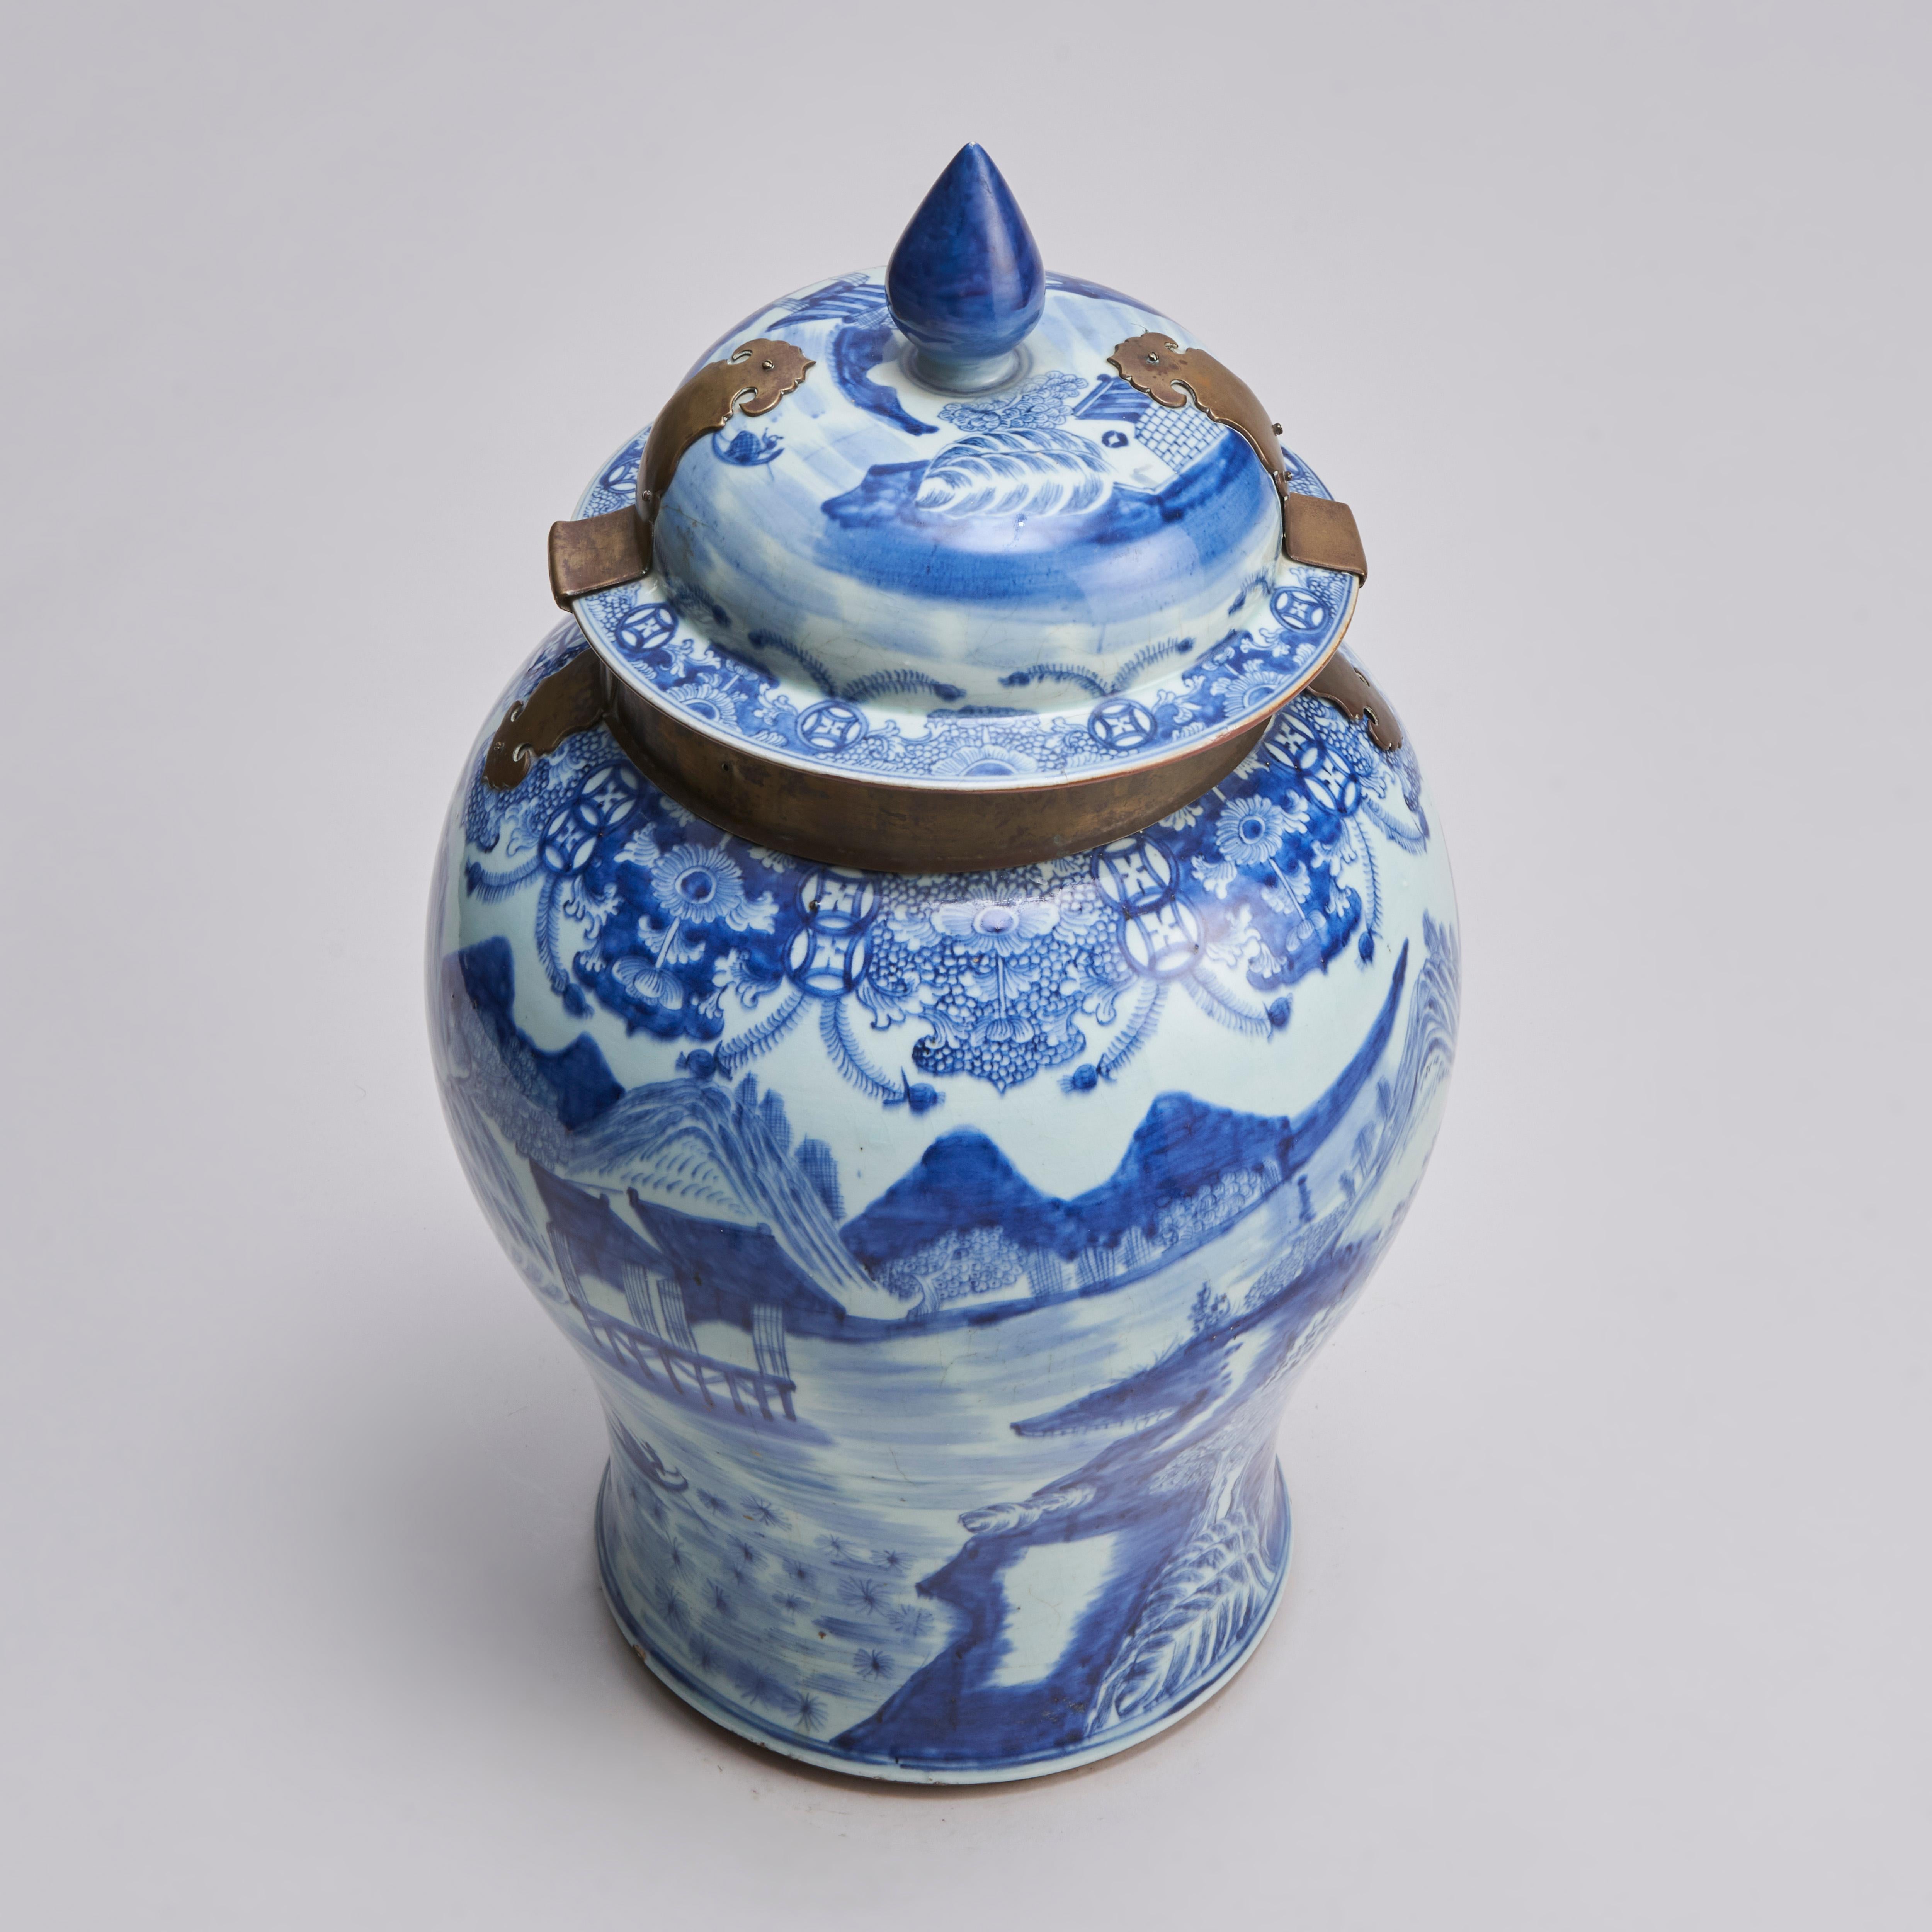 A large 18th century Chinese blue and white temple jar and cover, with original brass collar and lock.This would have been used to secure valuable spices as some were worth more than their weight in gold, (or porcelain even.) The vase itself is